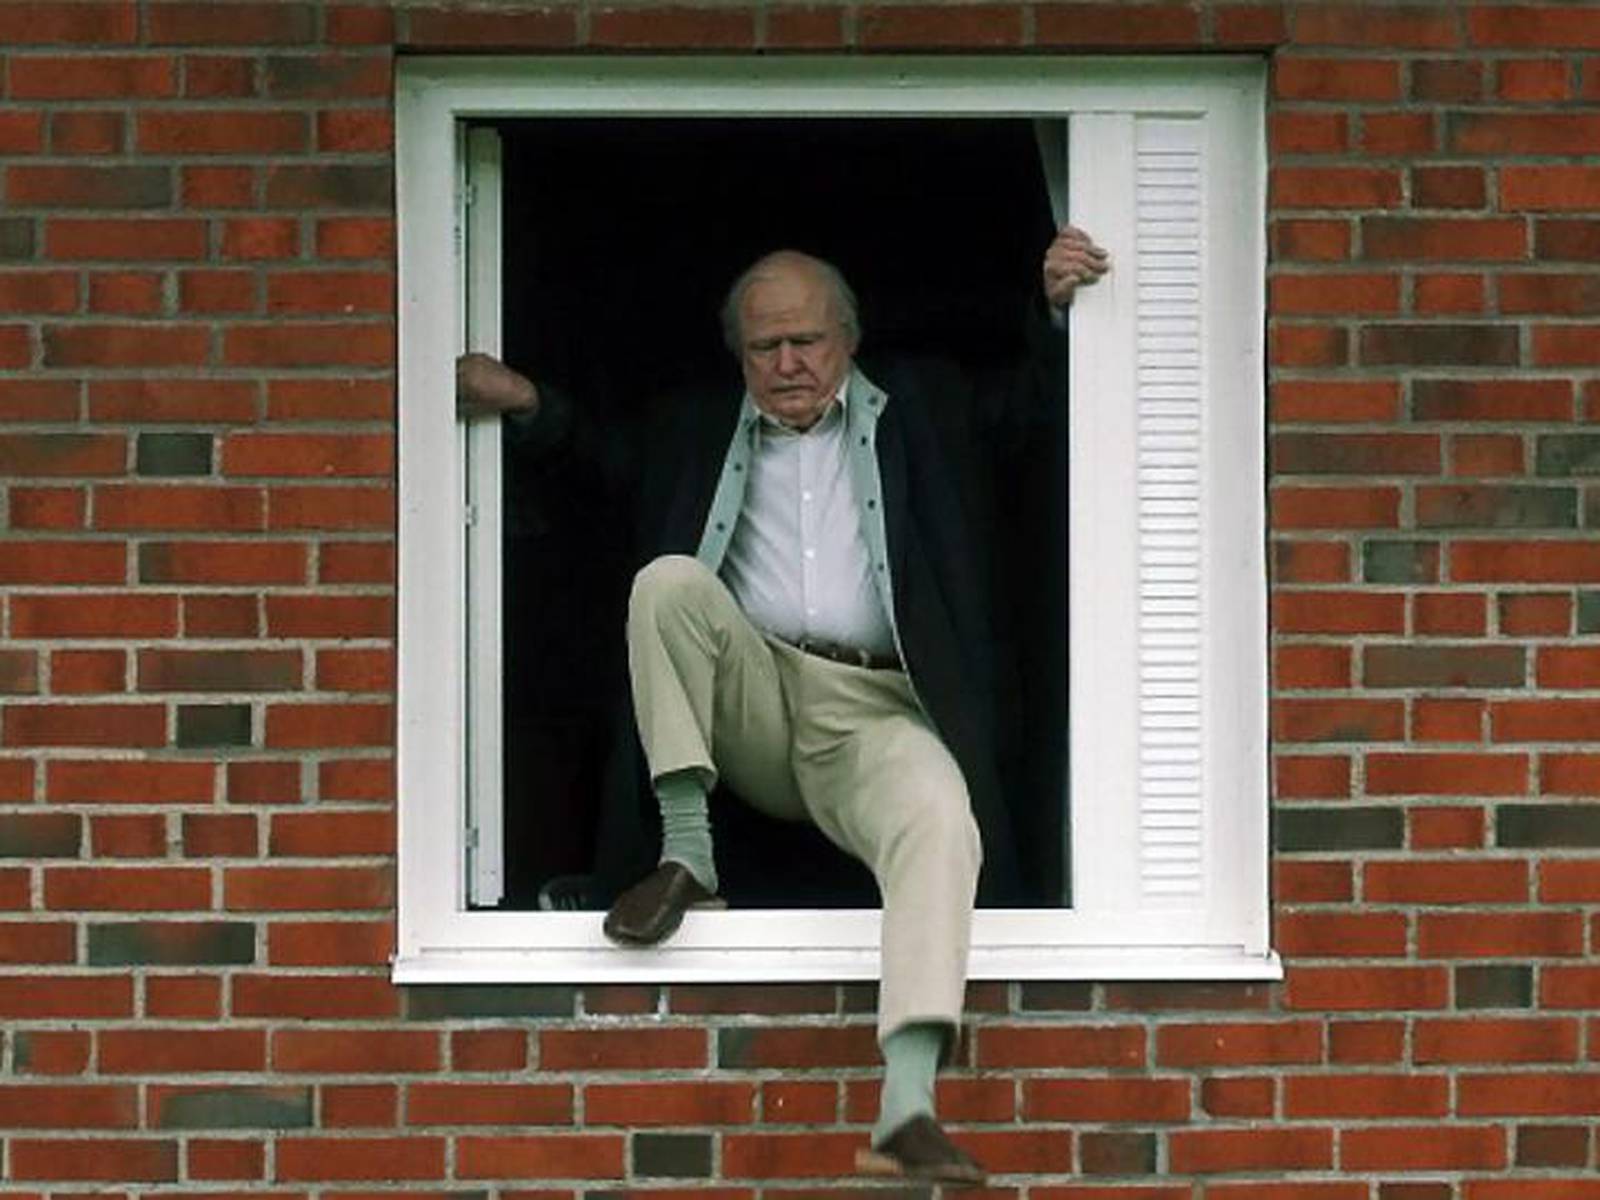 The 100-Year-Old Man Who Climbed Out the Window and Disappeared